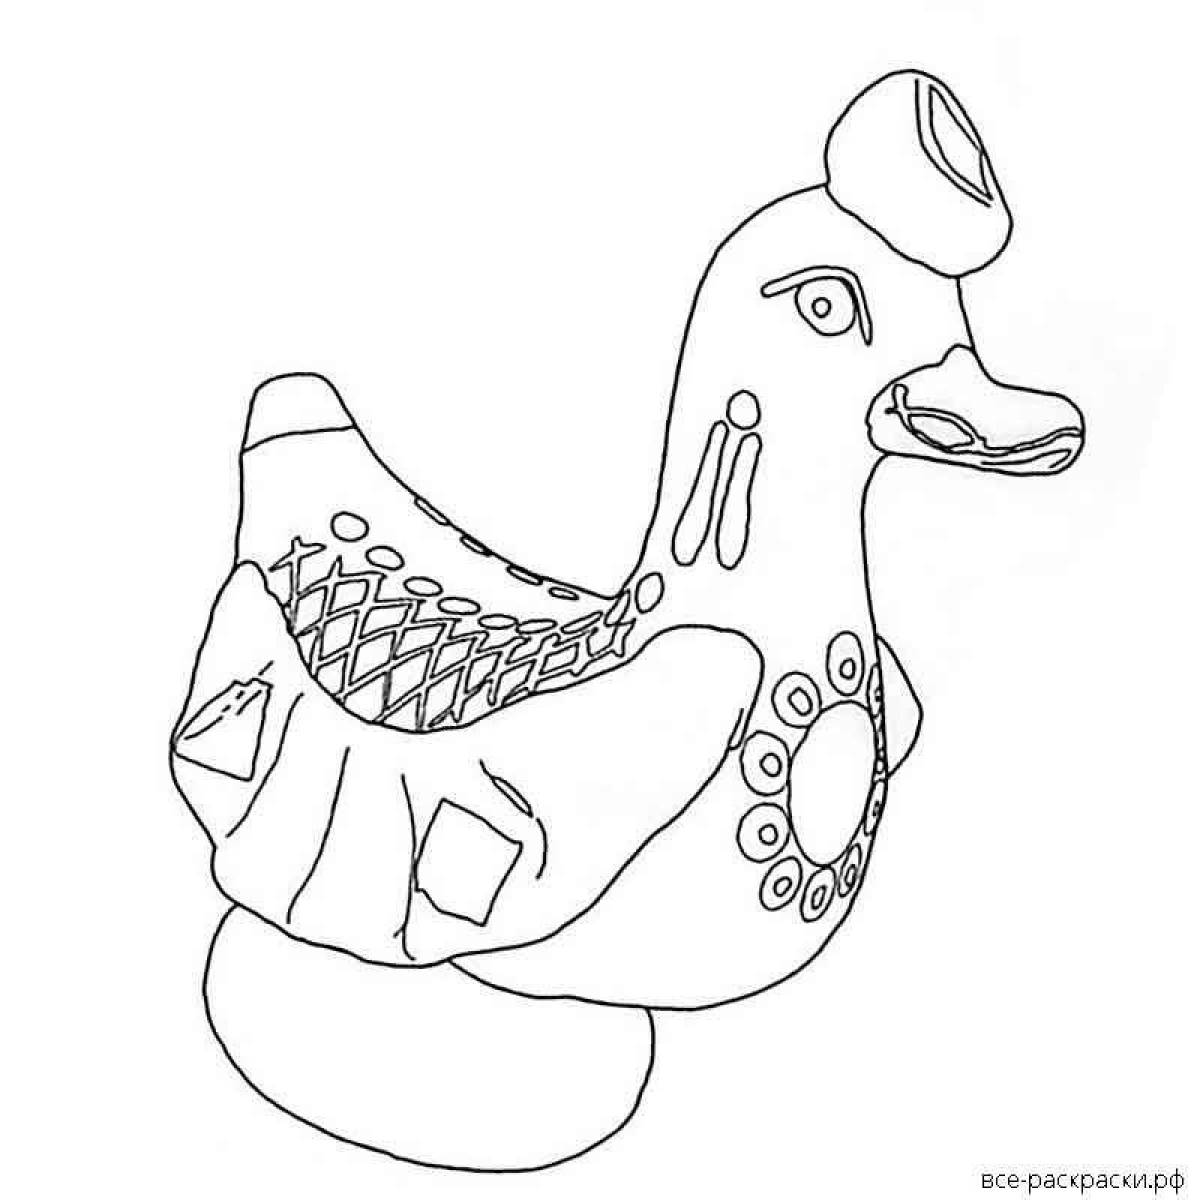 Playful Dymkovo duck, the second oldest coloring page